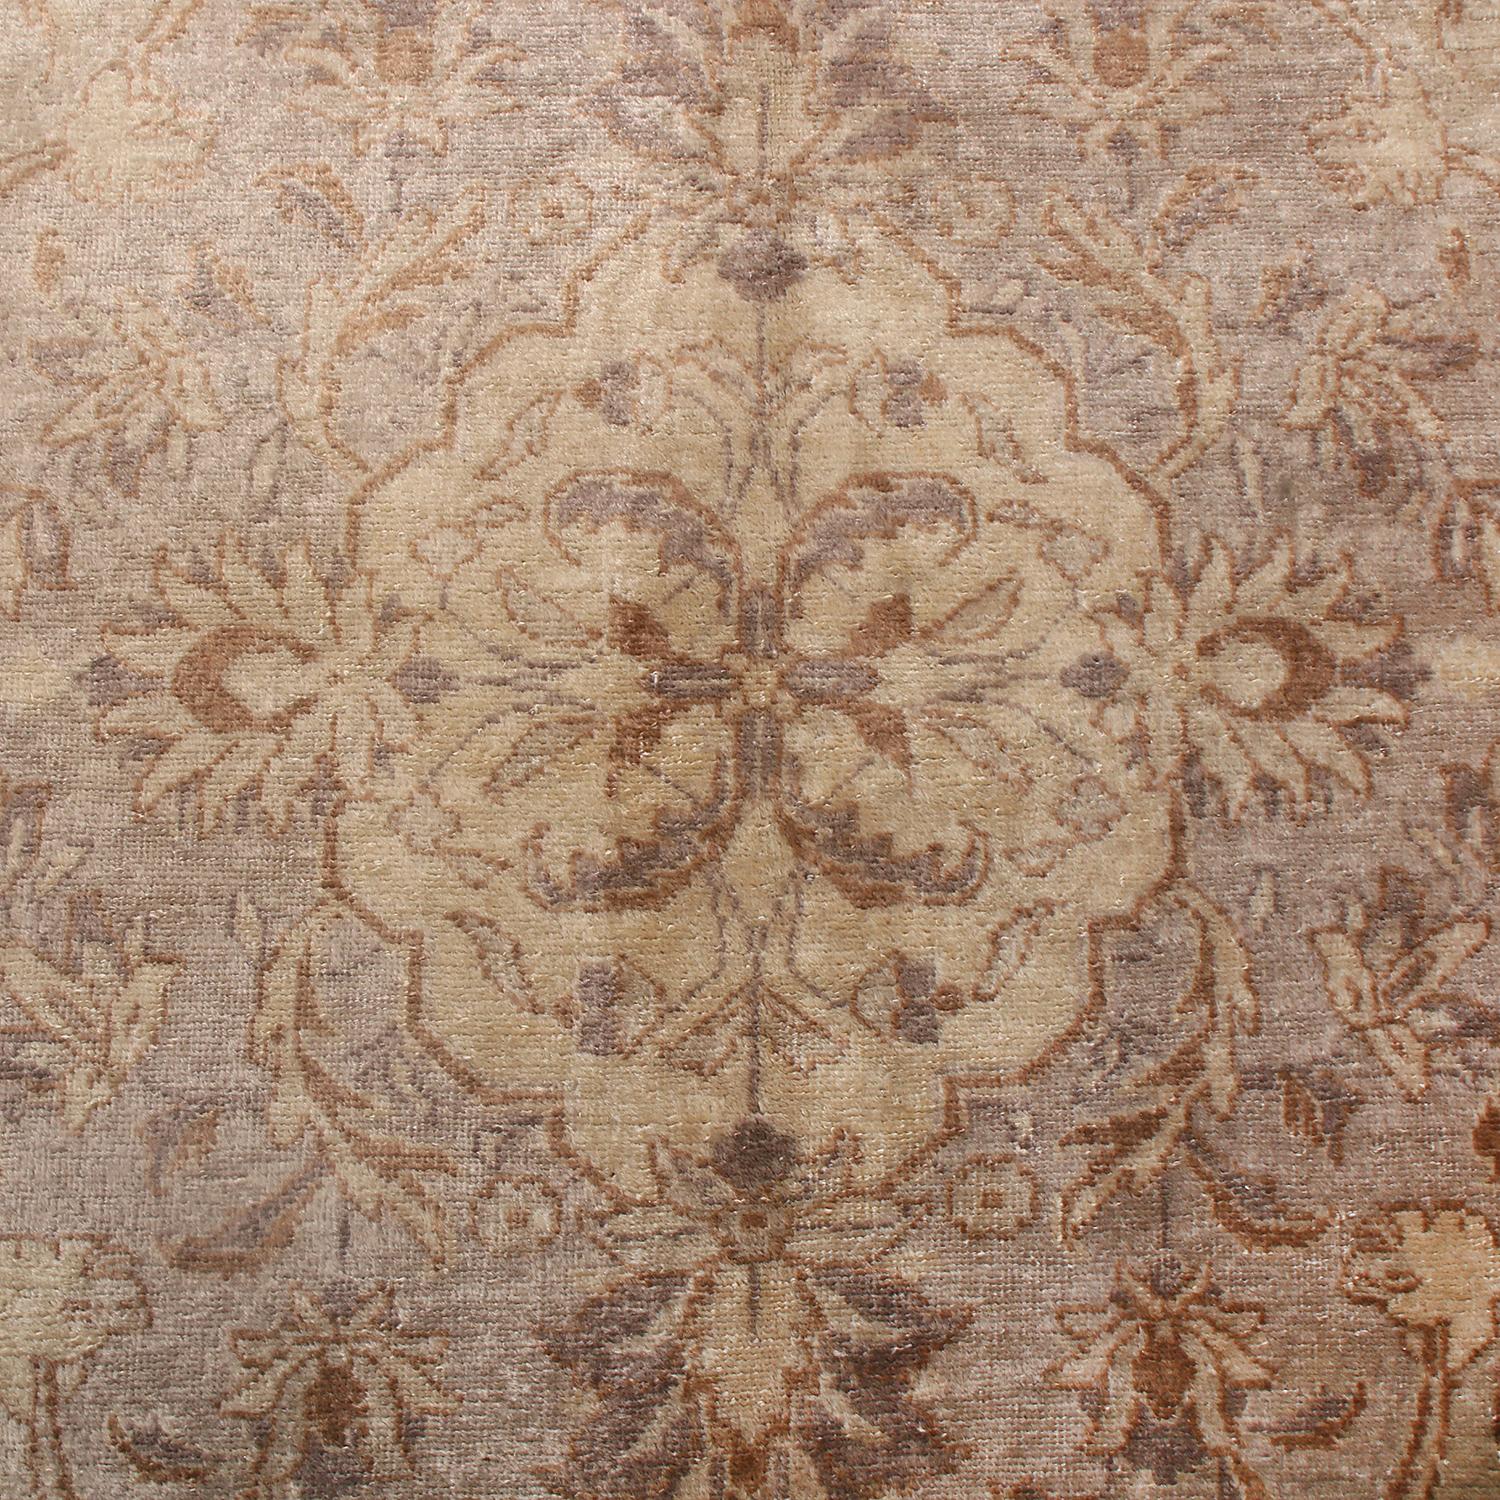 Hand-Knotted Antique Tabriz Floral Beige-Brown Wool Persian Rug